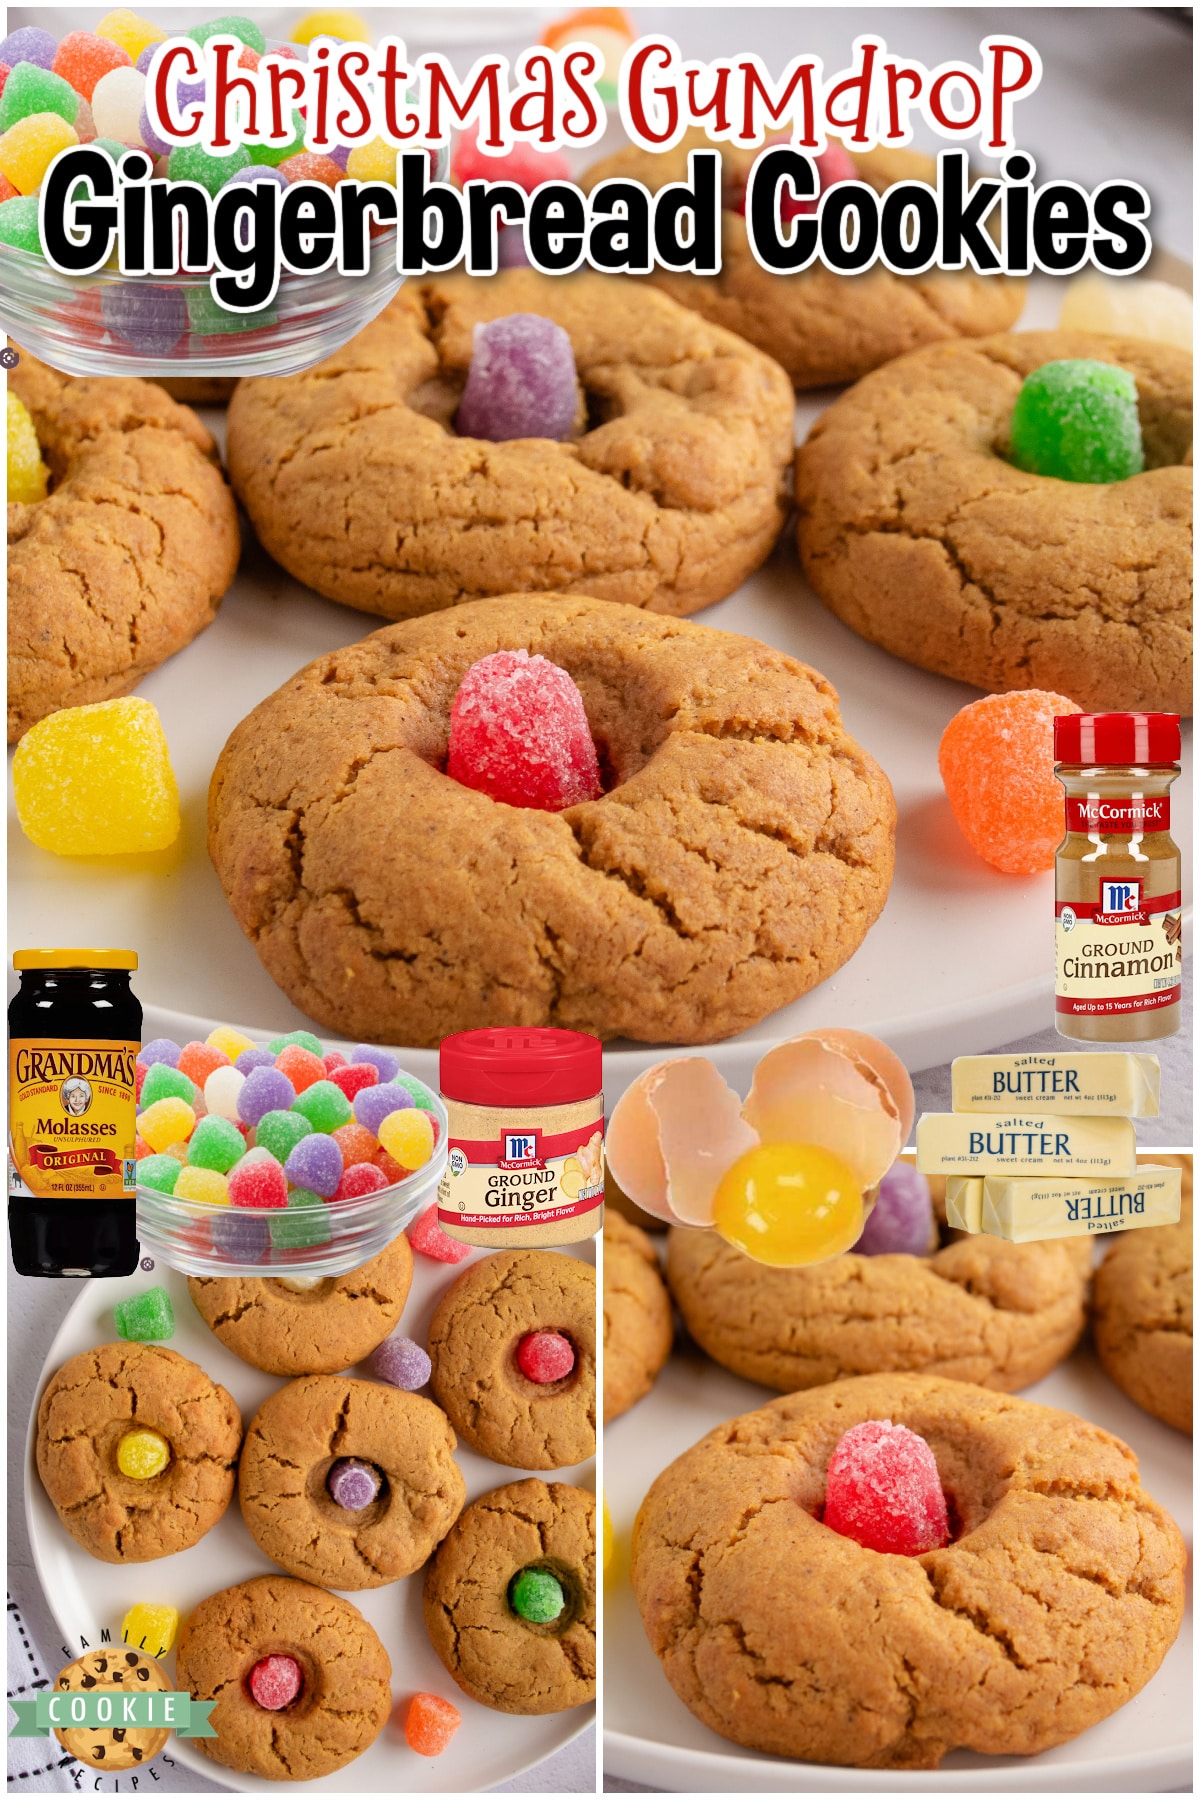 Gumdrop Gingerbread Cookies are a classic Christmas treat that everyone enjoys! These cookies with gumdrops are an easy way to enjoy gingerbread!